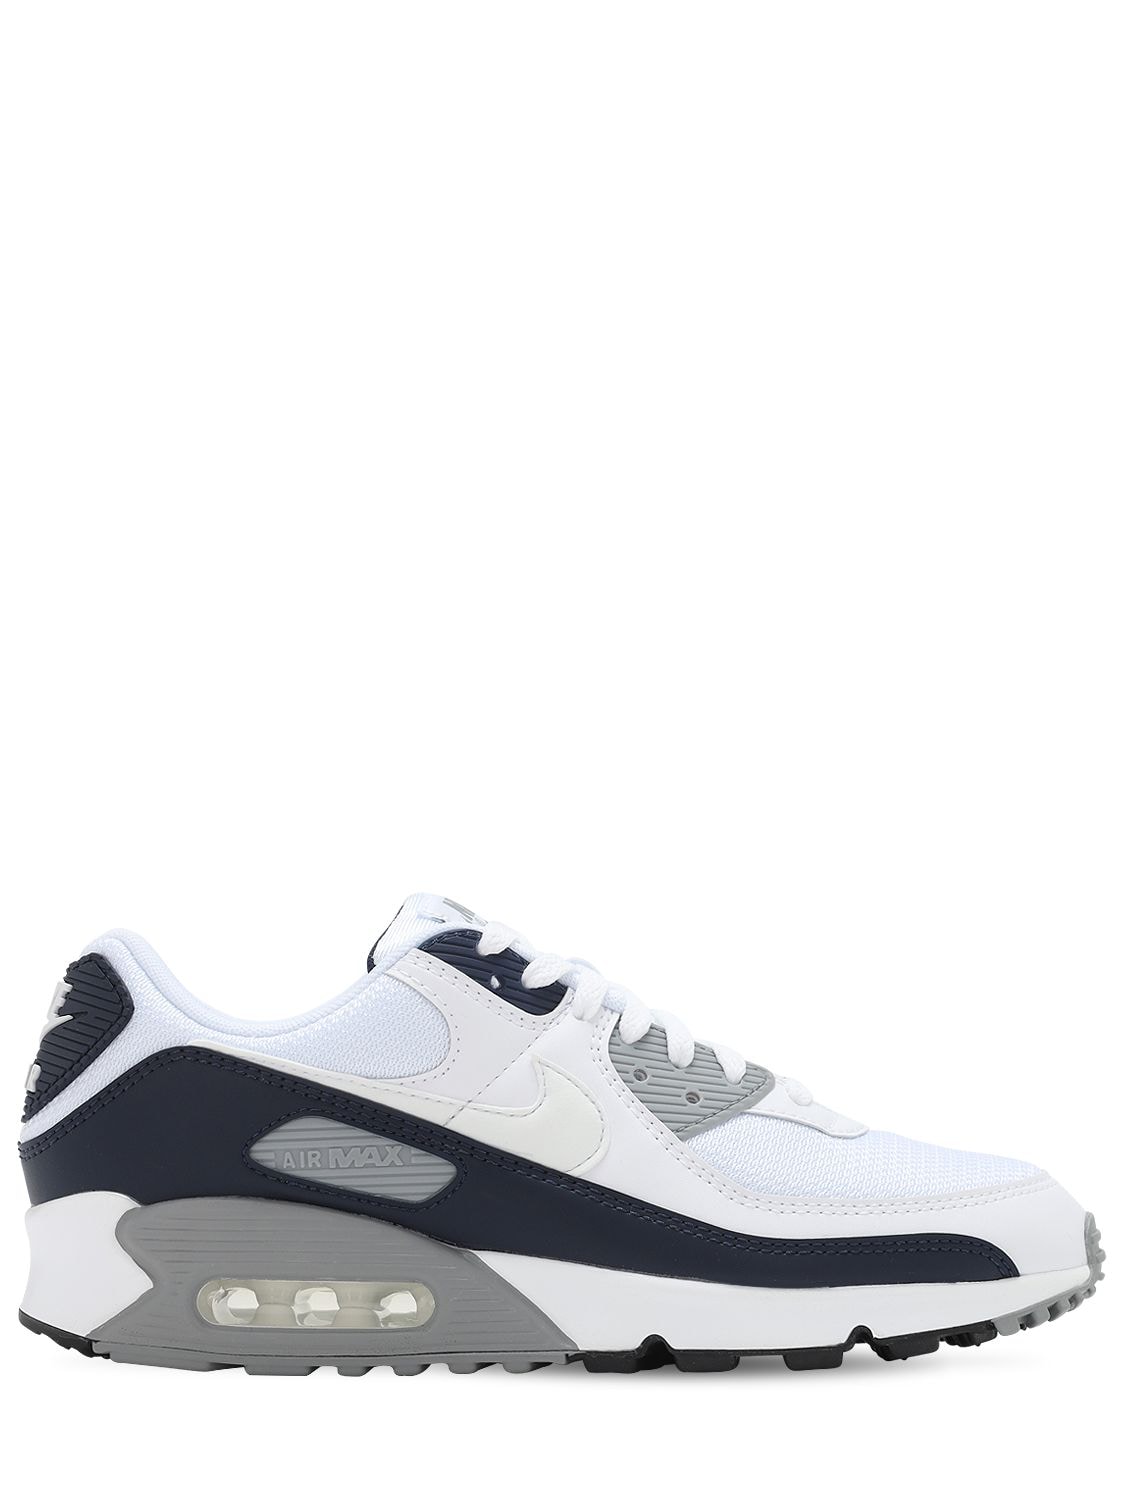 Nike Air Max 90 Sneakers In White,gry,blue